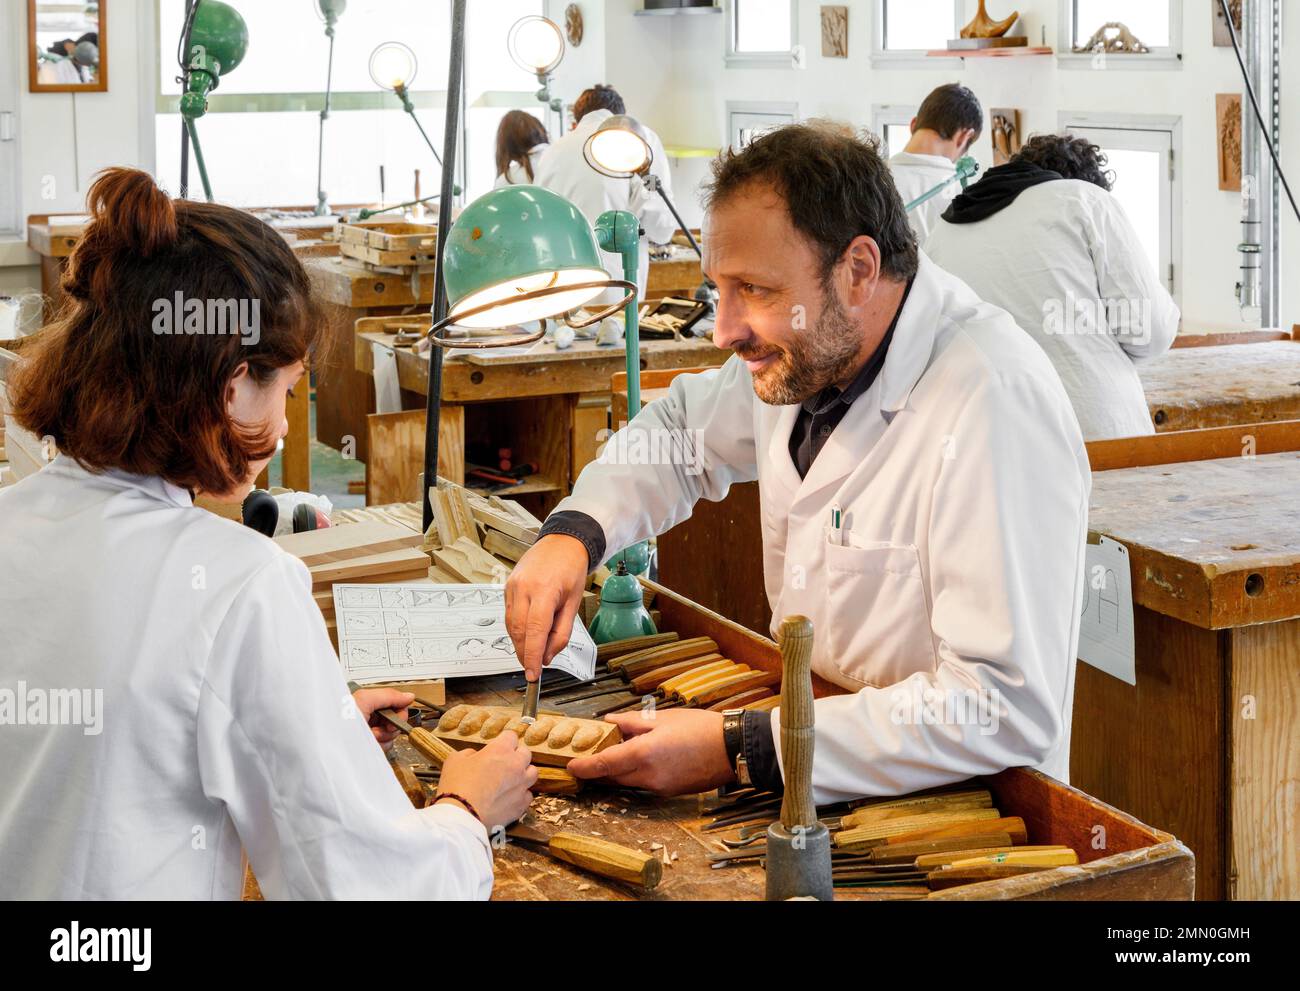 France, Pyrenees Atlantiques, Bearn, Nay, Coarraze trades high school, scene of work and training inside an educational class for training cabinetmakers in a vocational high school Stock Photo